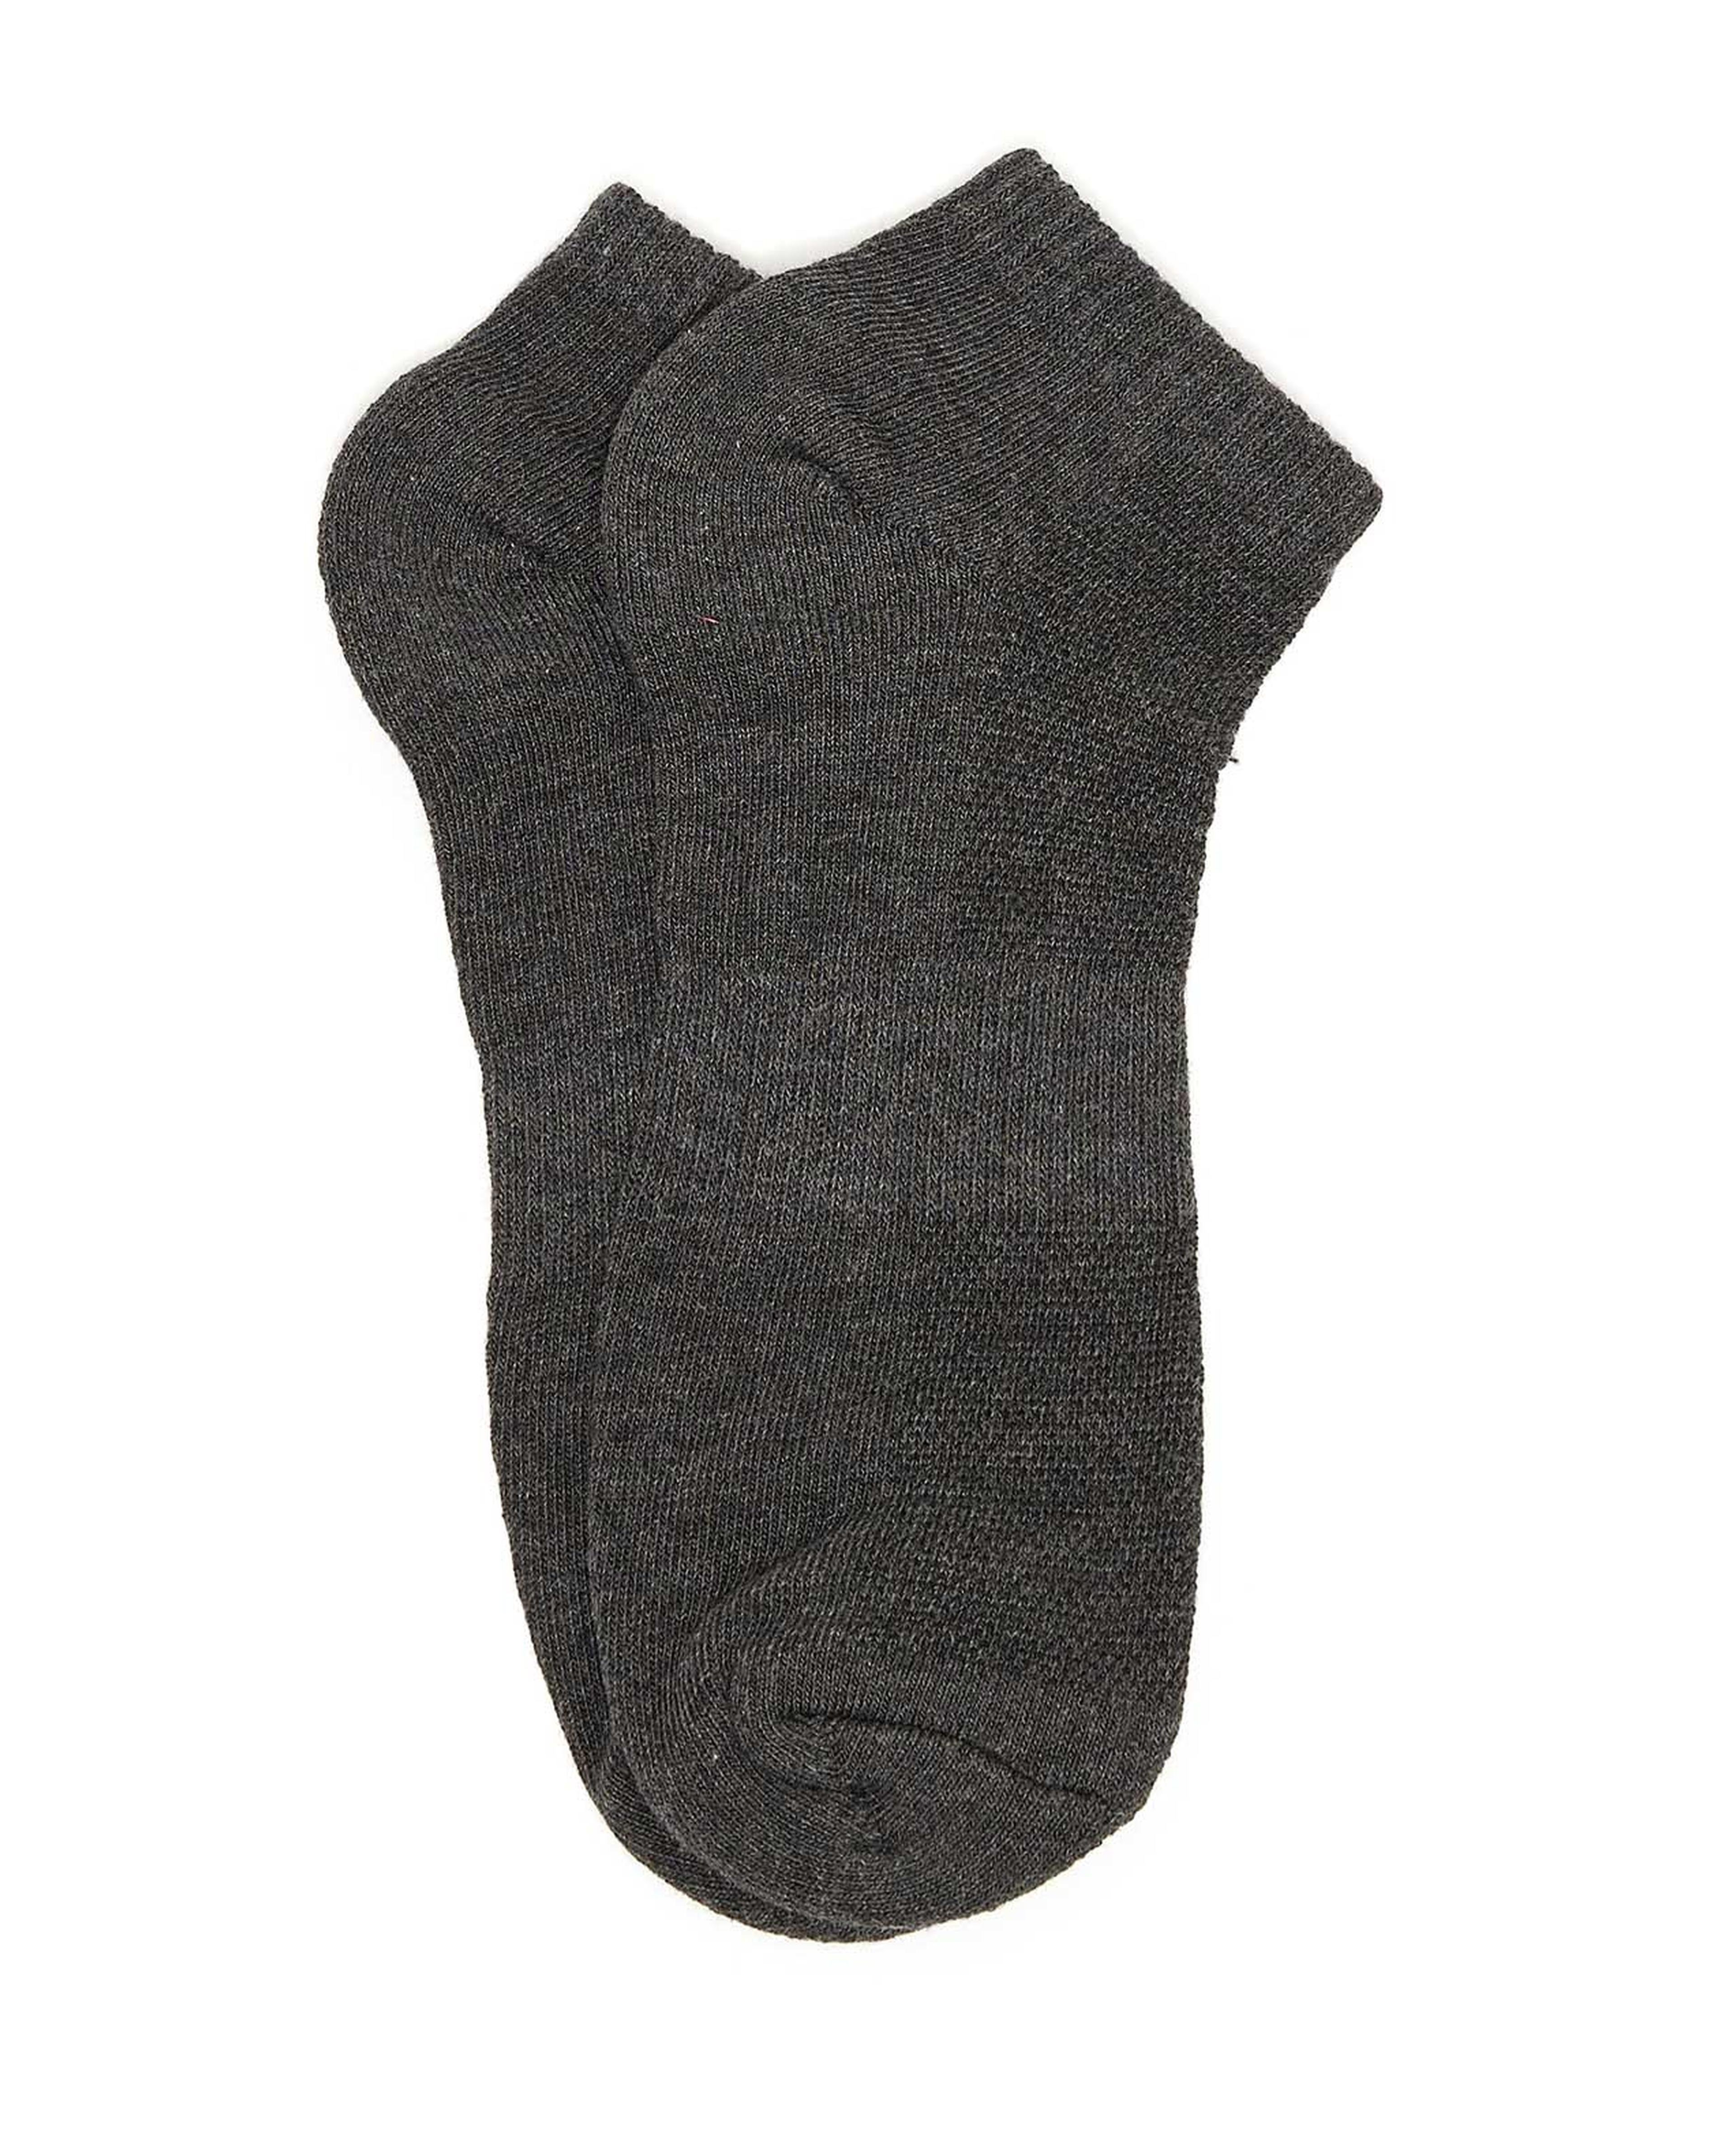 Pack of 3 Knitted Ankle Socks